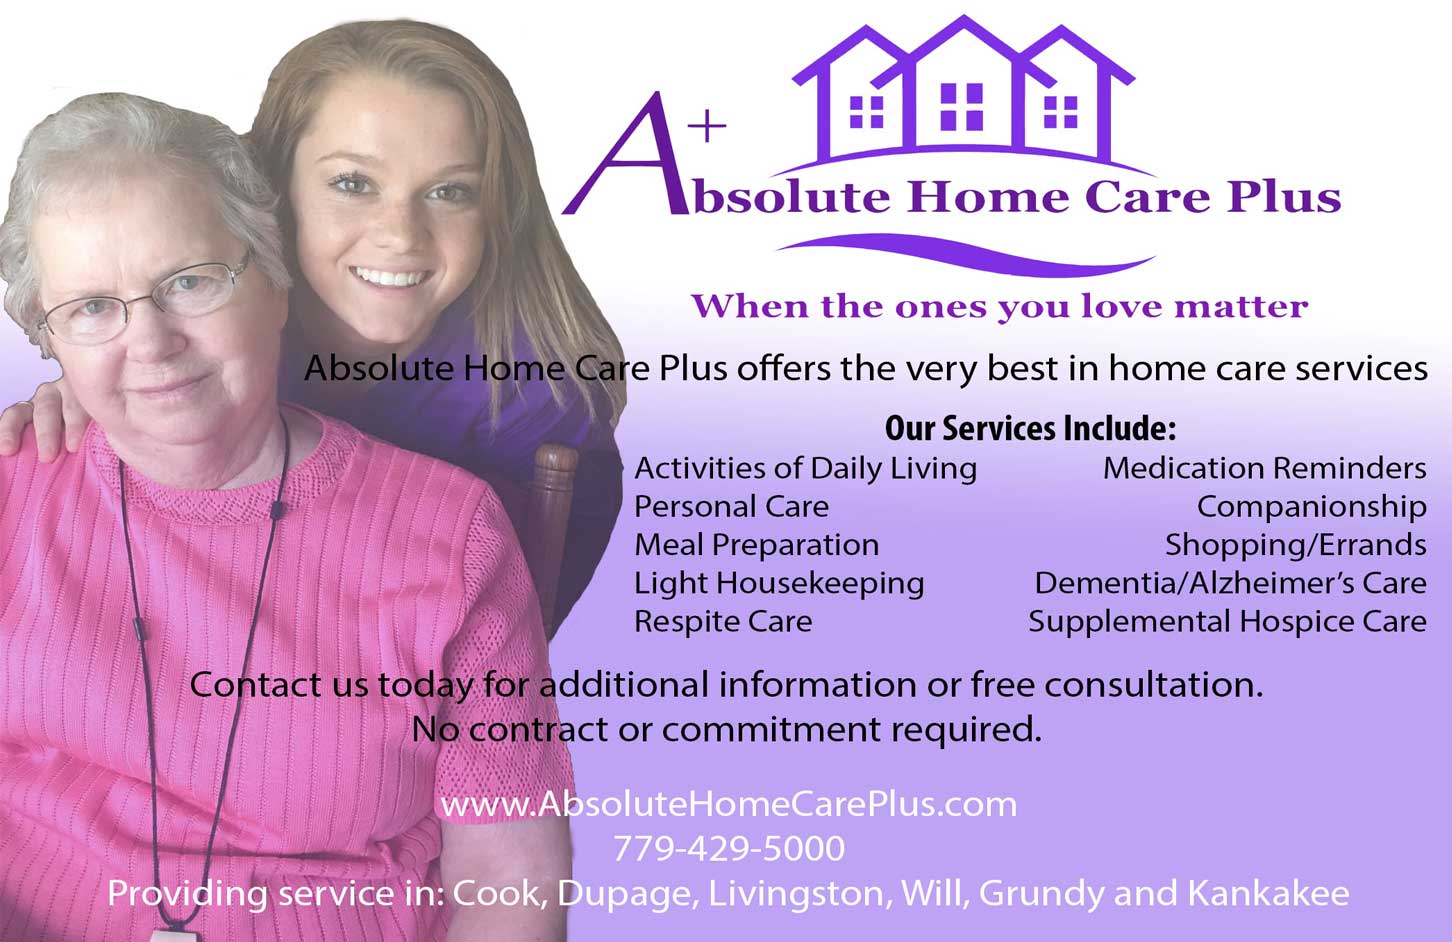 Absolute Home Care Plus of Illinois image